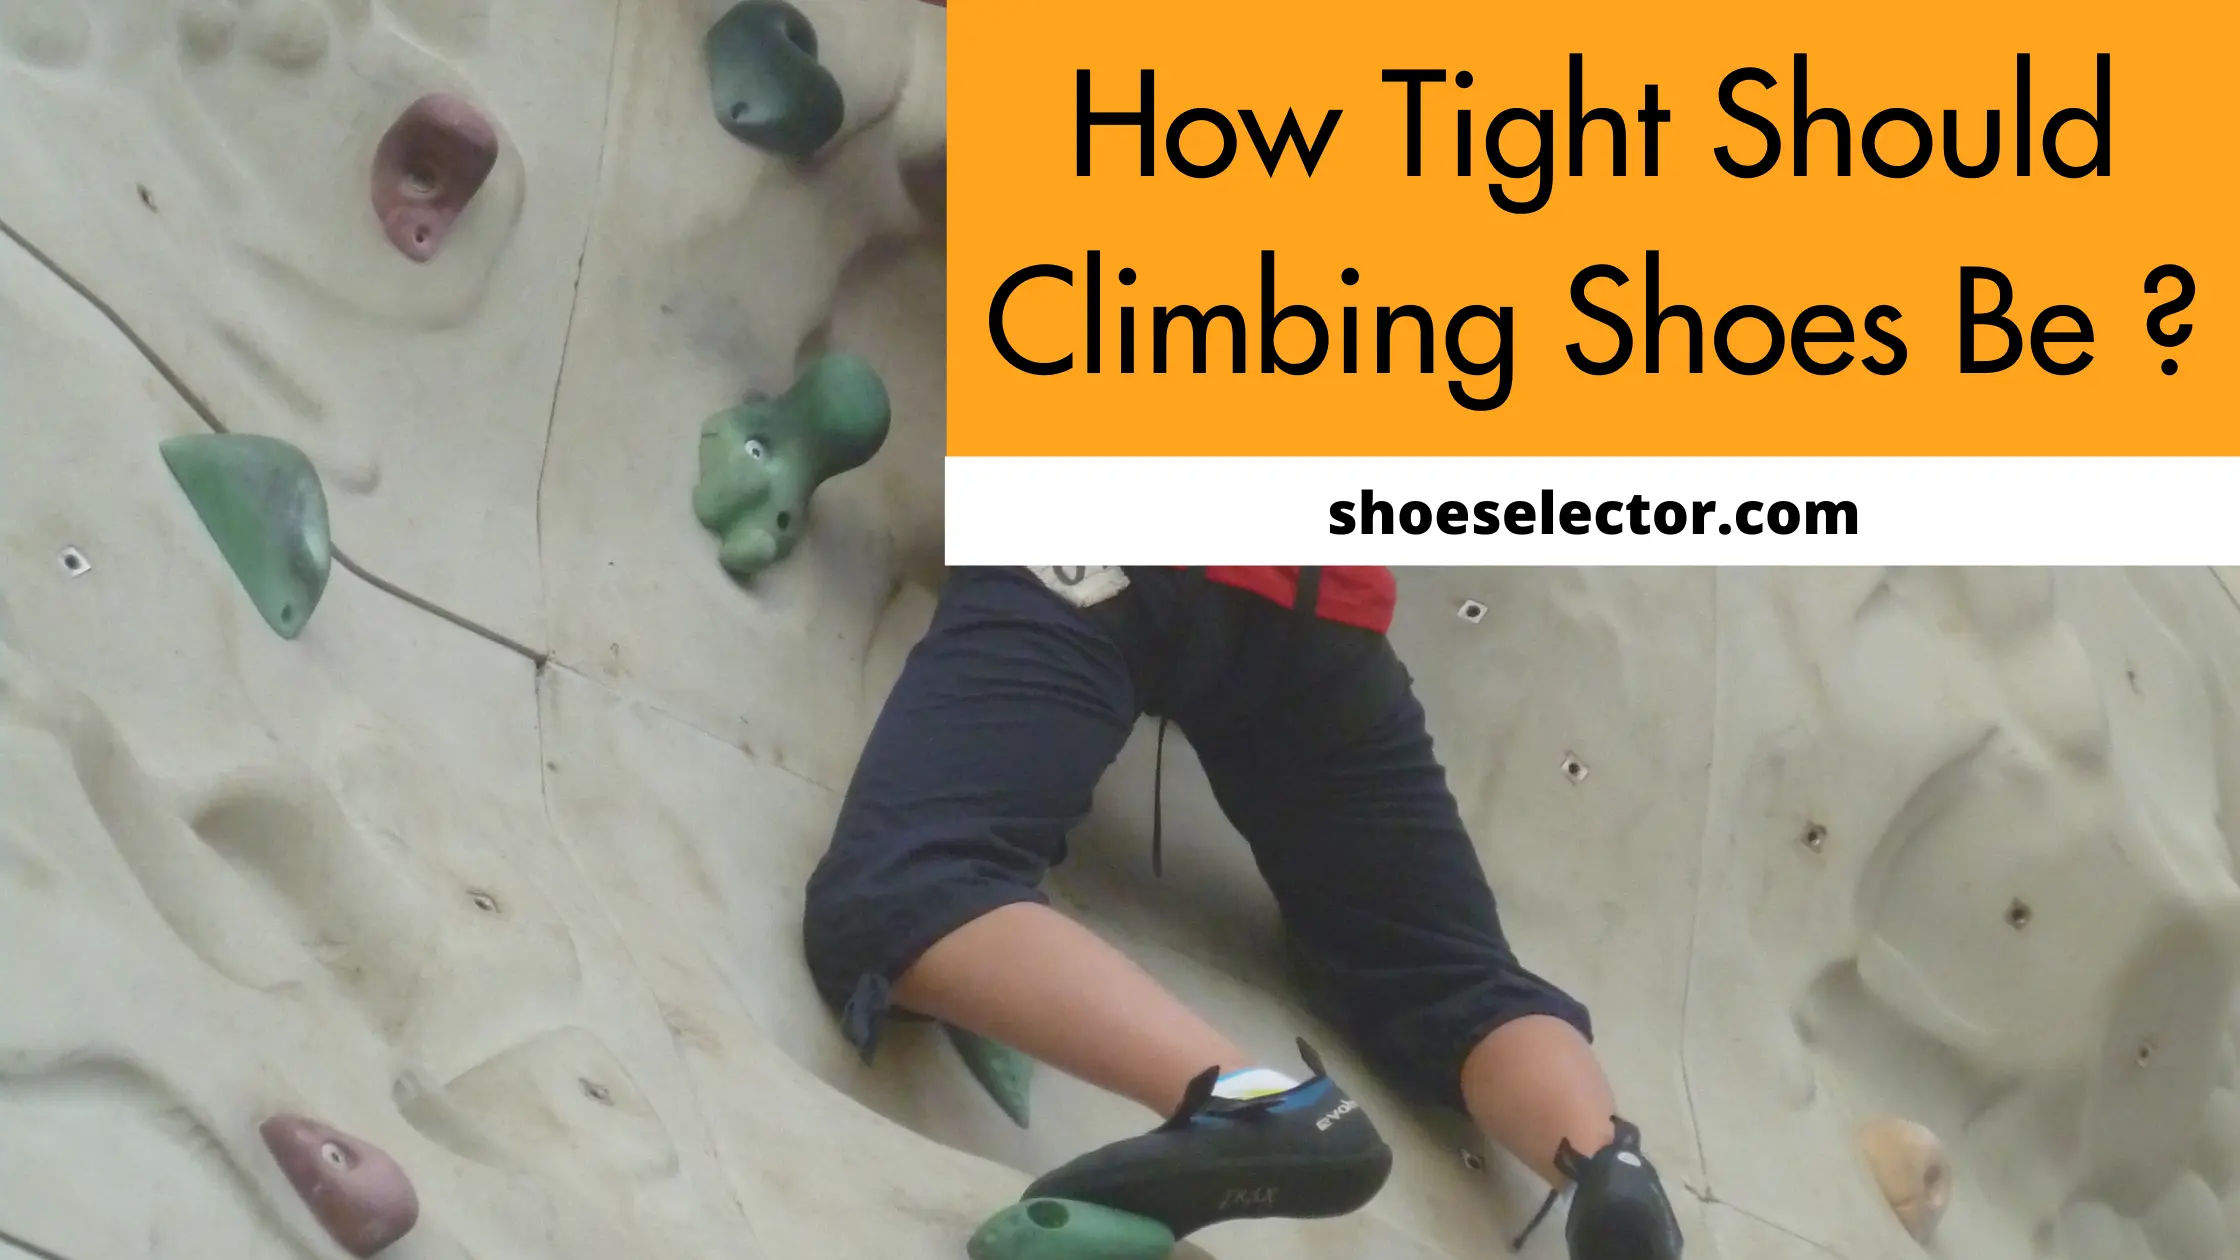 How Tight Should Climbing Shoes Be? - Quick Guide